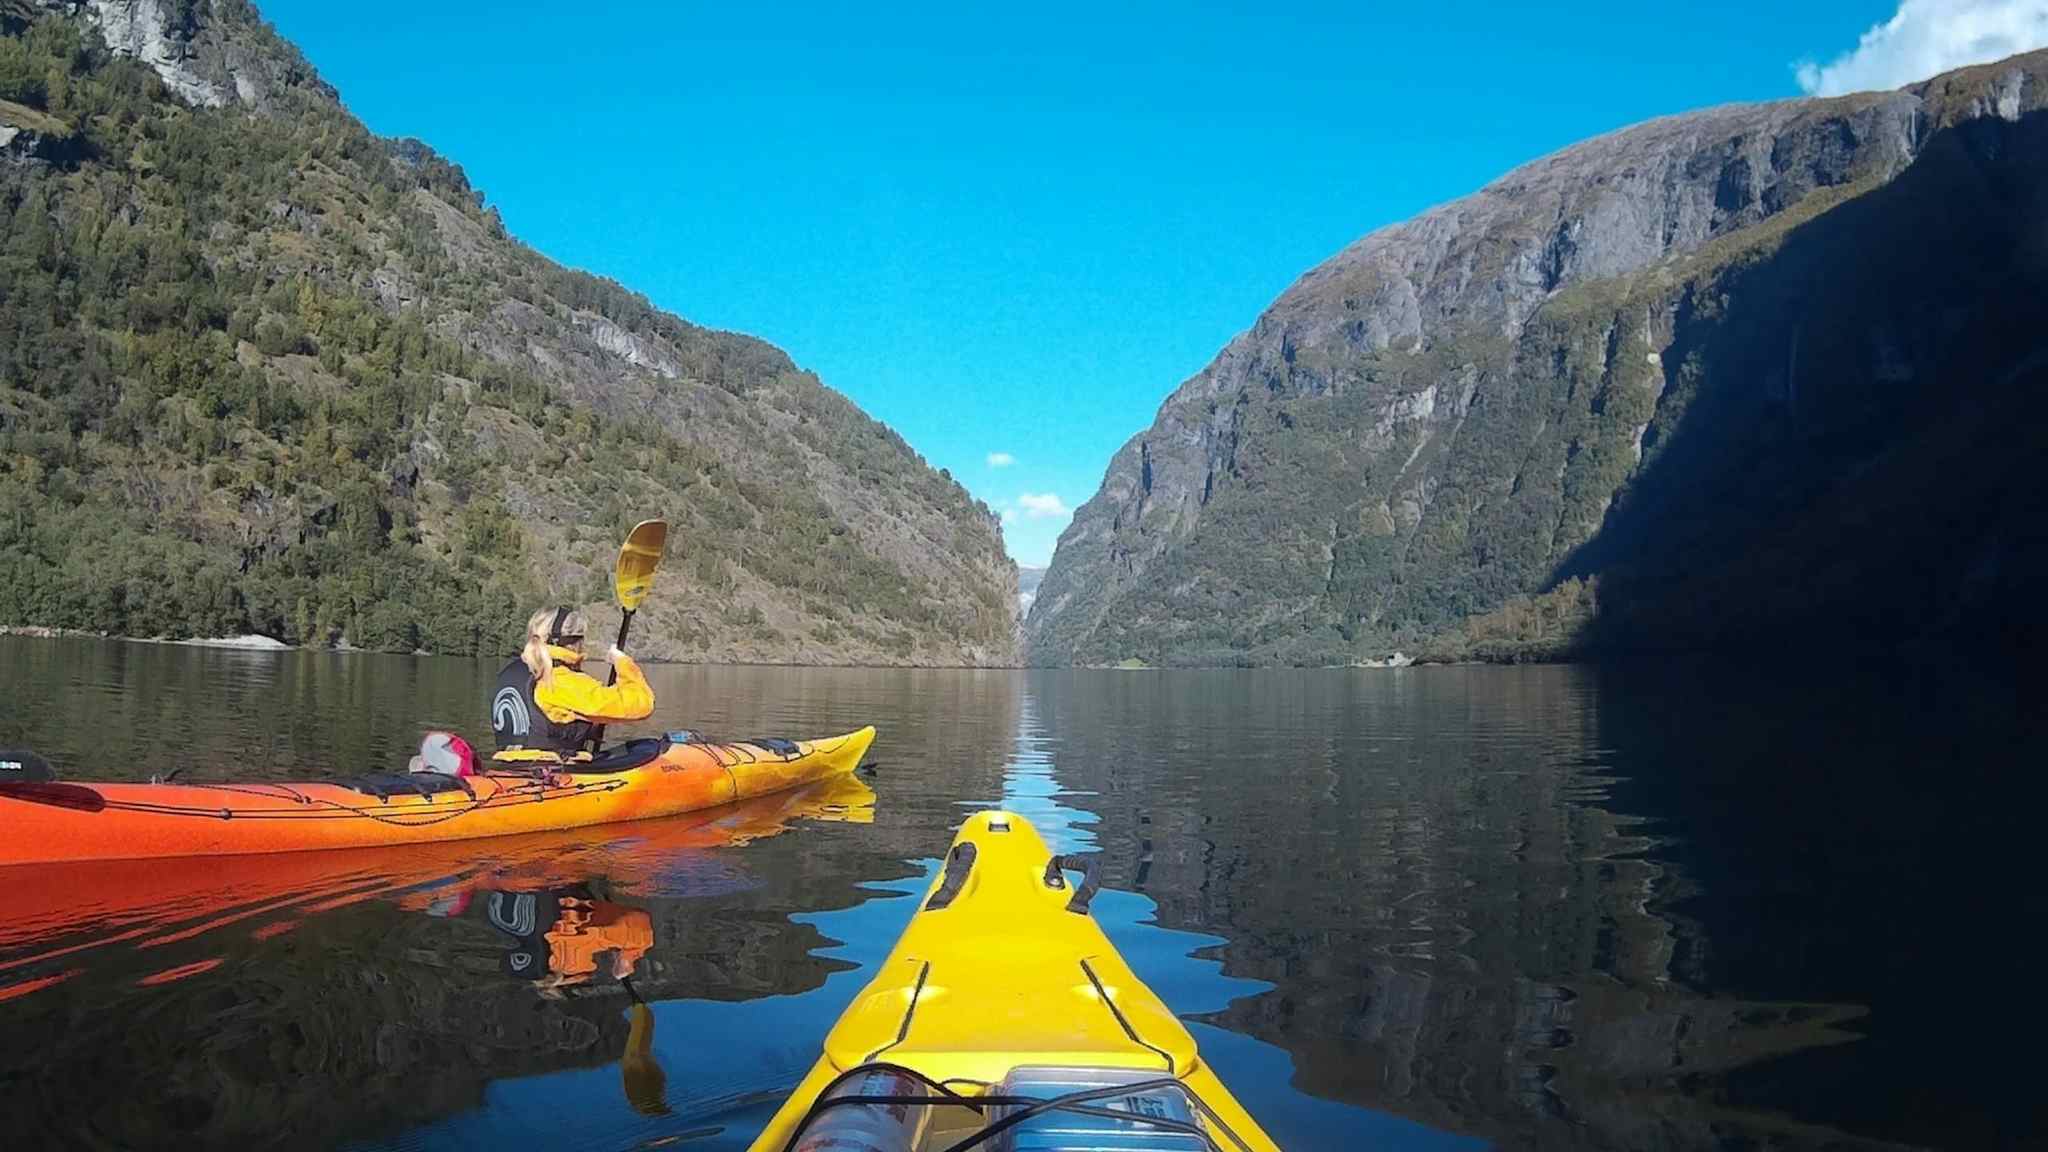 POV from a kayak